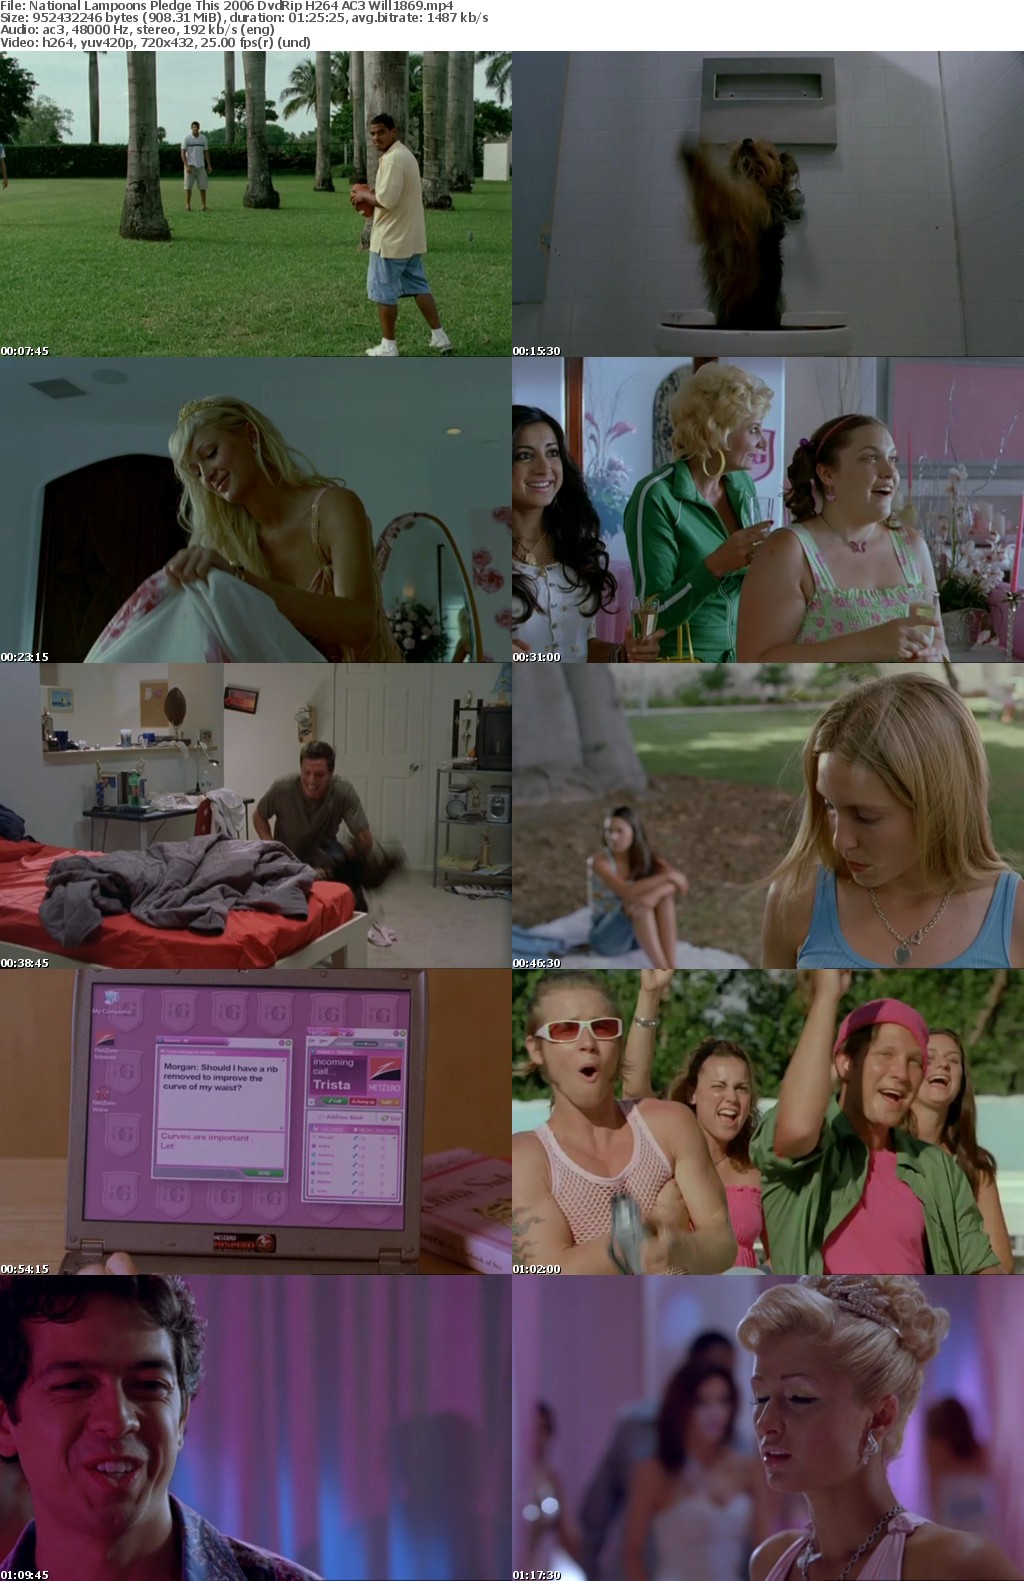 National Lampoons Pledge This 2006 DvdRip H264 AC3 Will1869